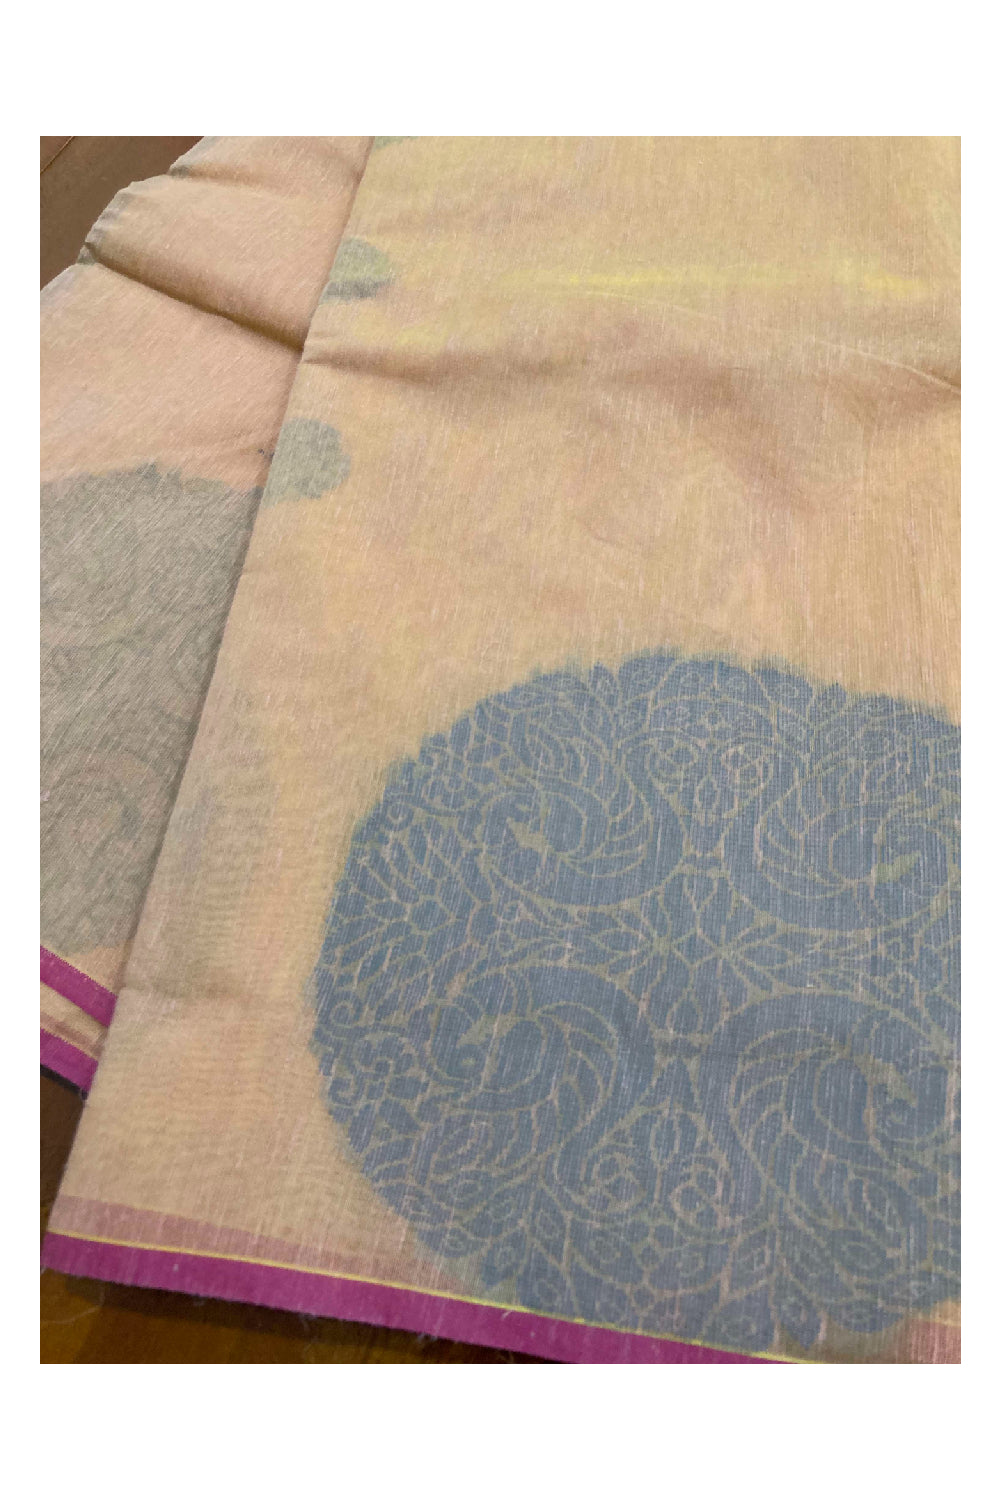 Southloom Sico Gadwal Semi Silk Saree in Light Brown and Grey with Elephant Motifs (Blouse Piece with Work)